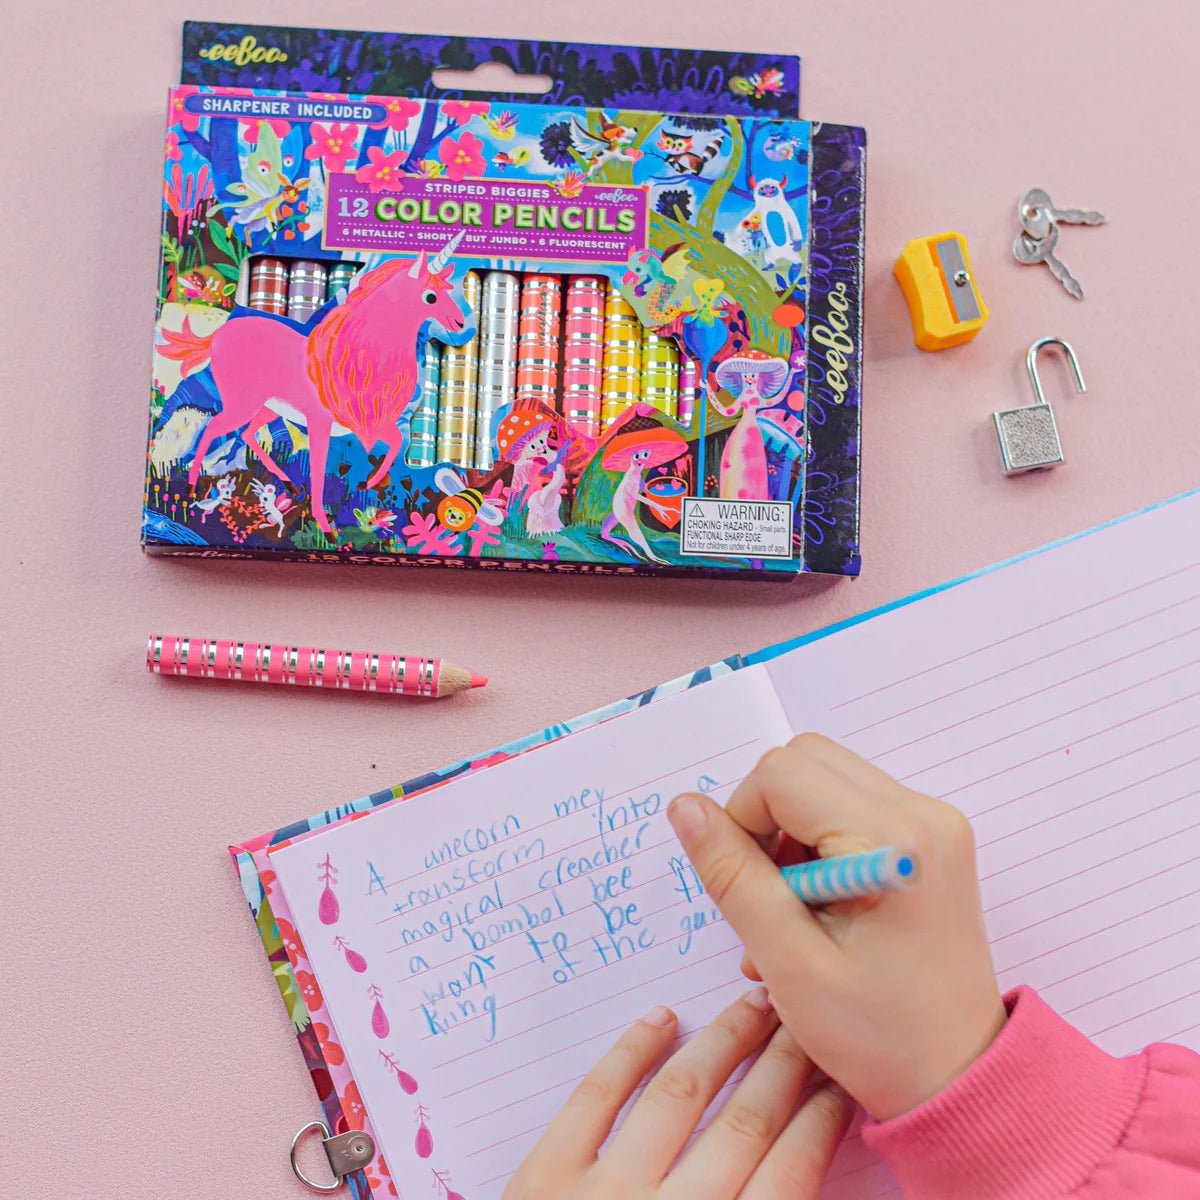 Child wearing a pink sweater writing in a journal with a blue metallic pencil